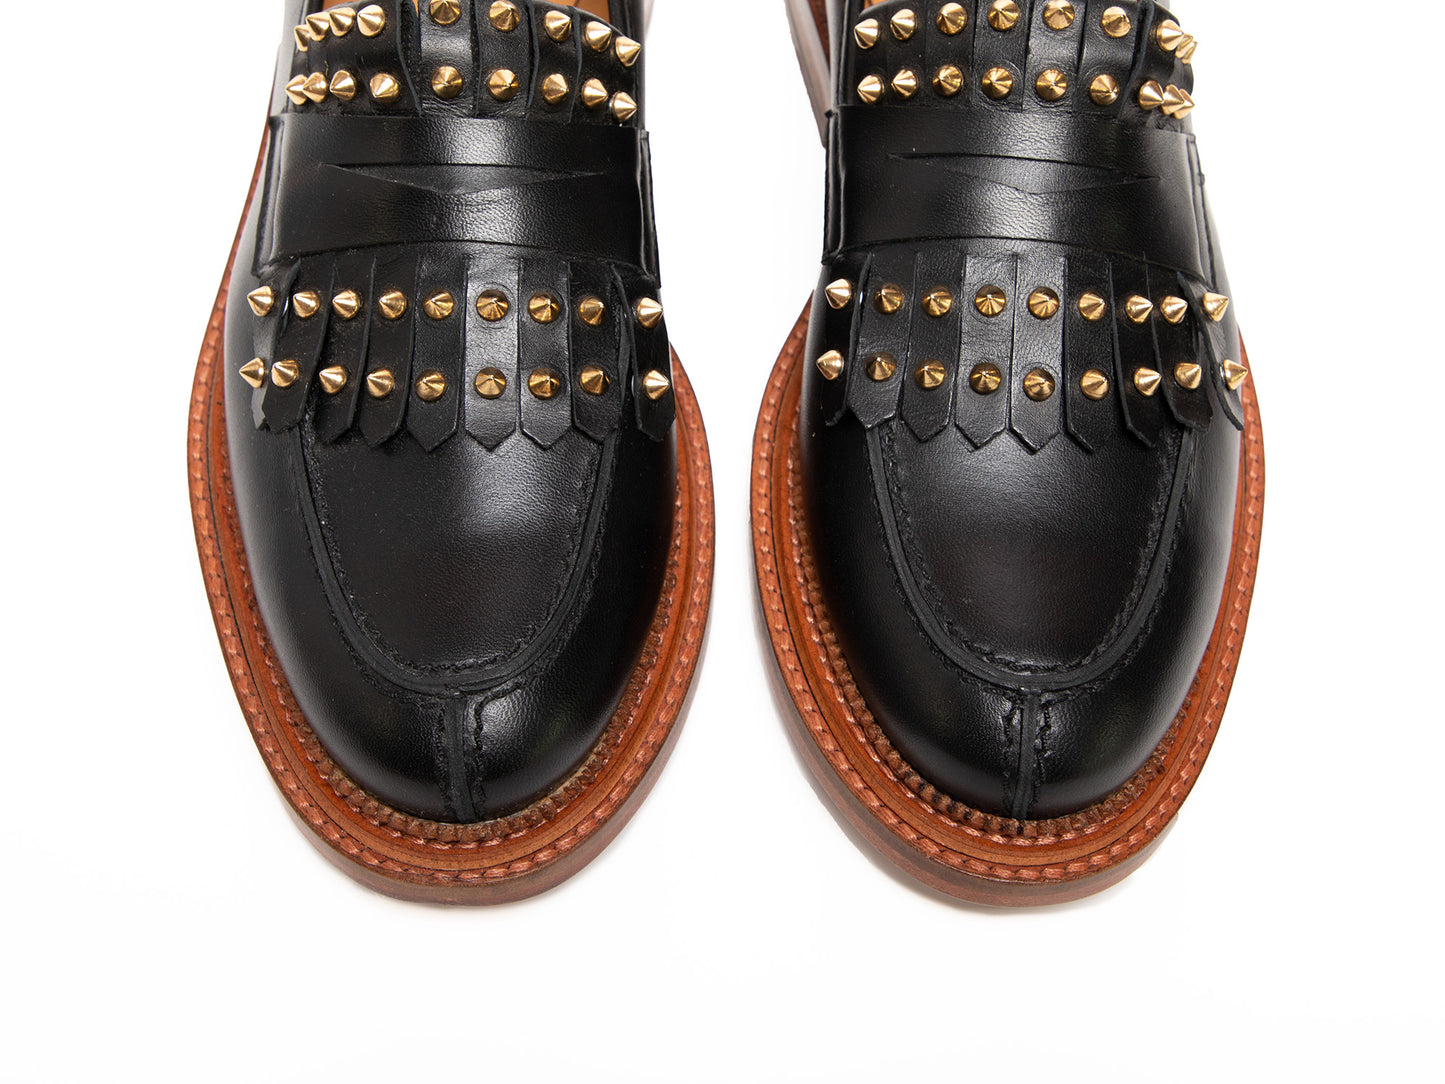 LILY - Black Penny Loafer with Studded Kiltie